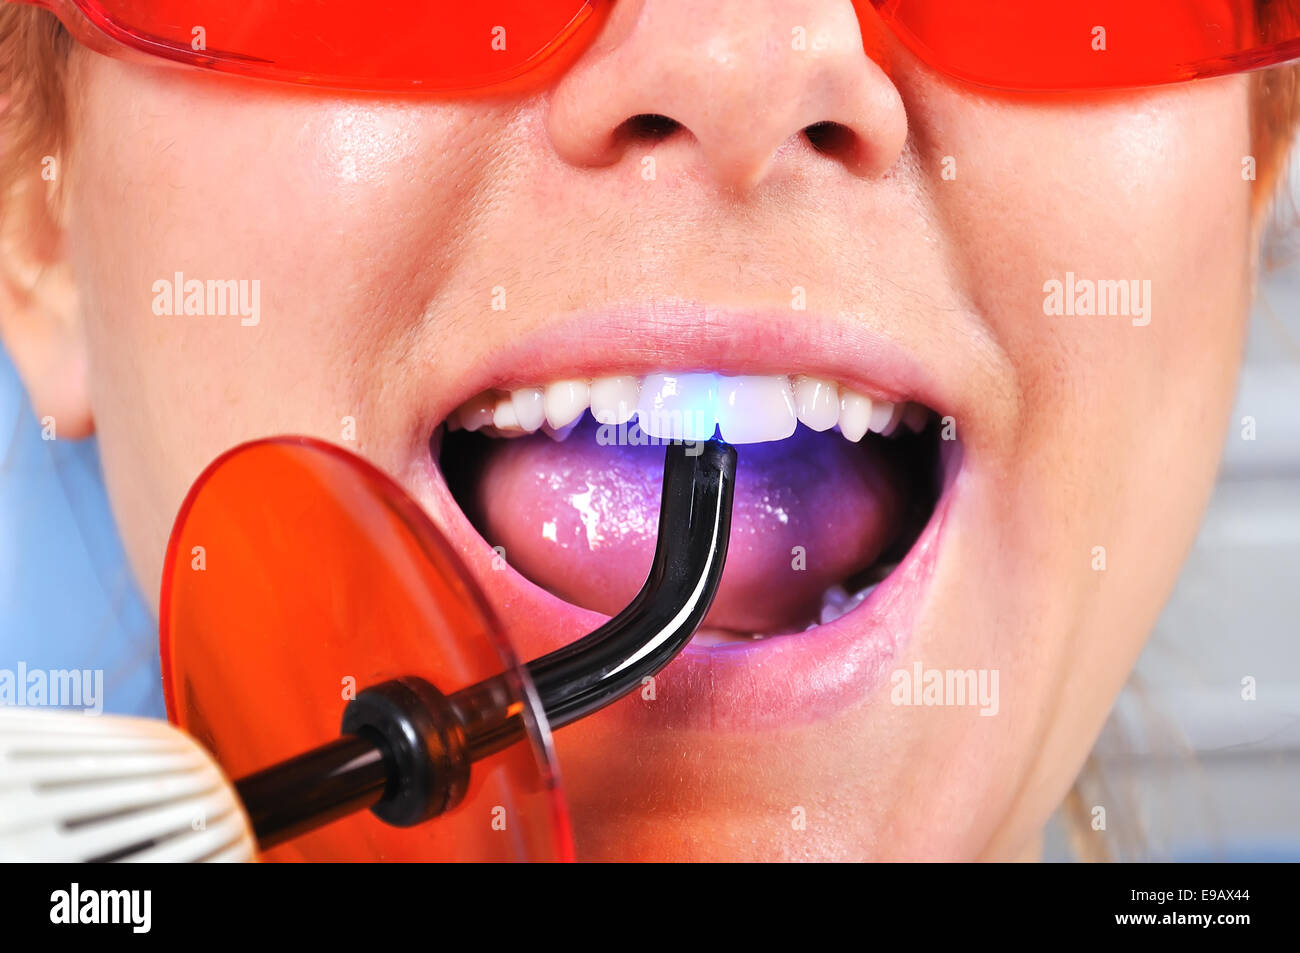 tooth filling ultraviolet lamp, close up Stock Photo